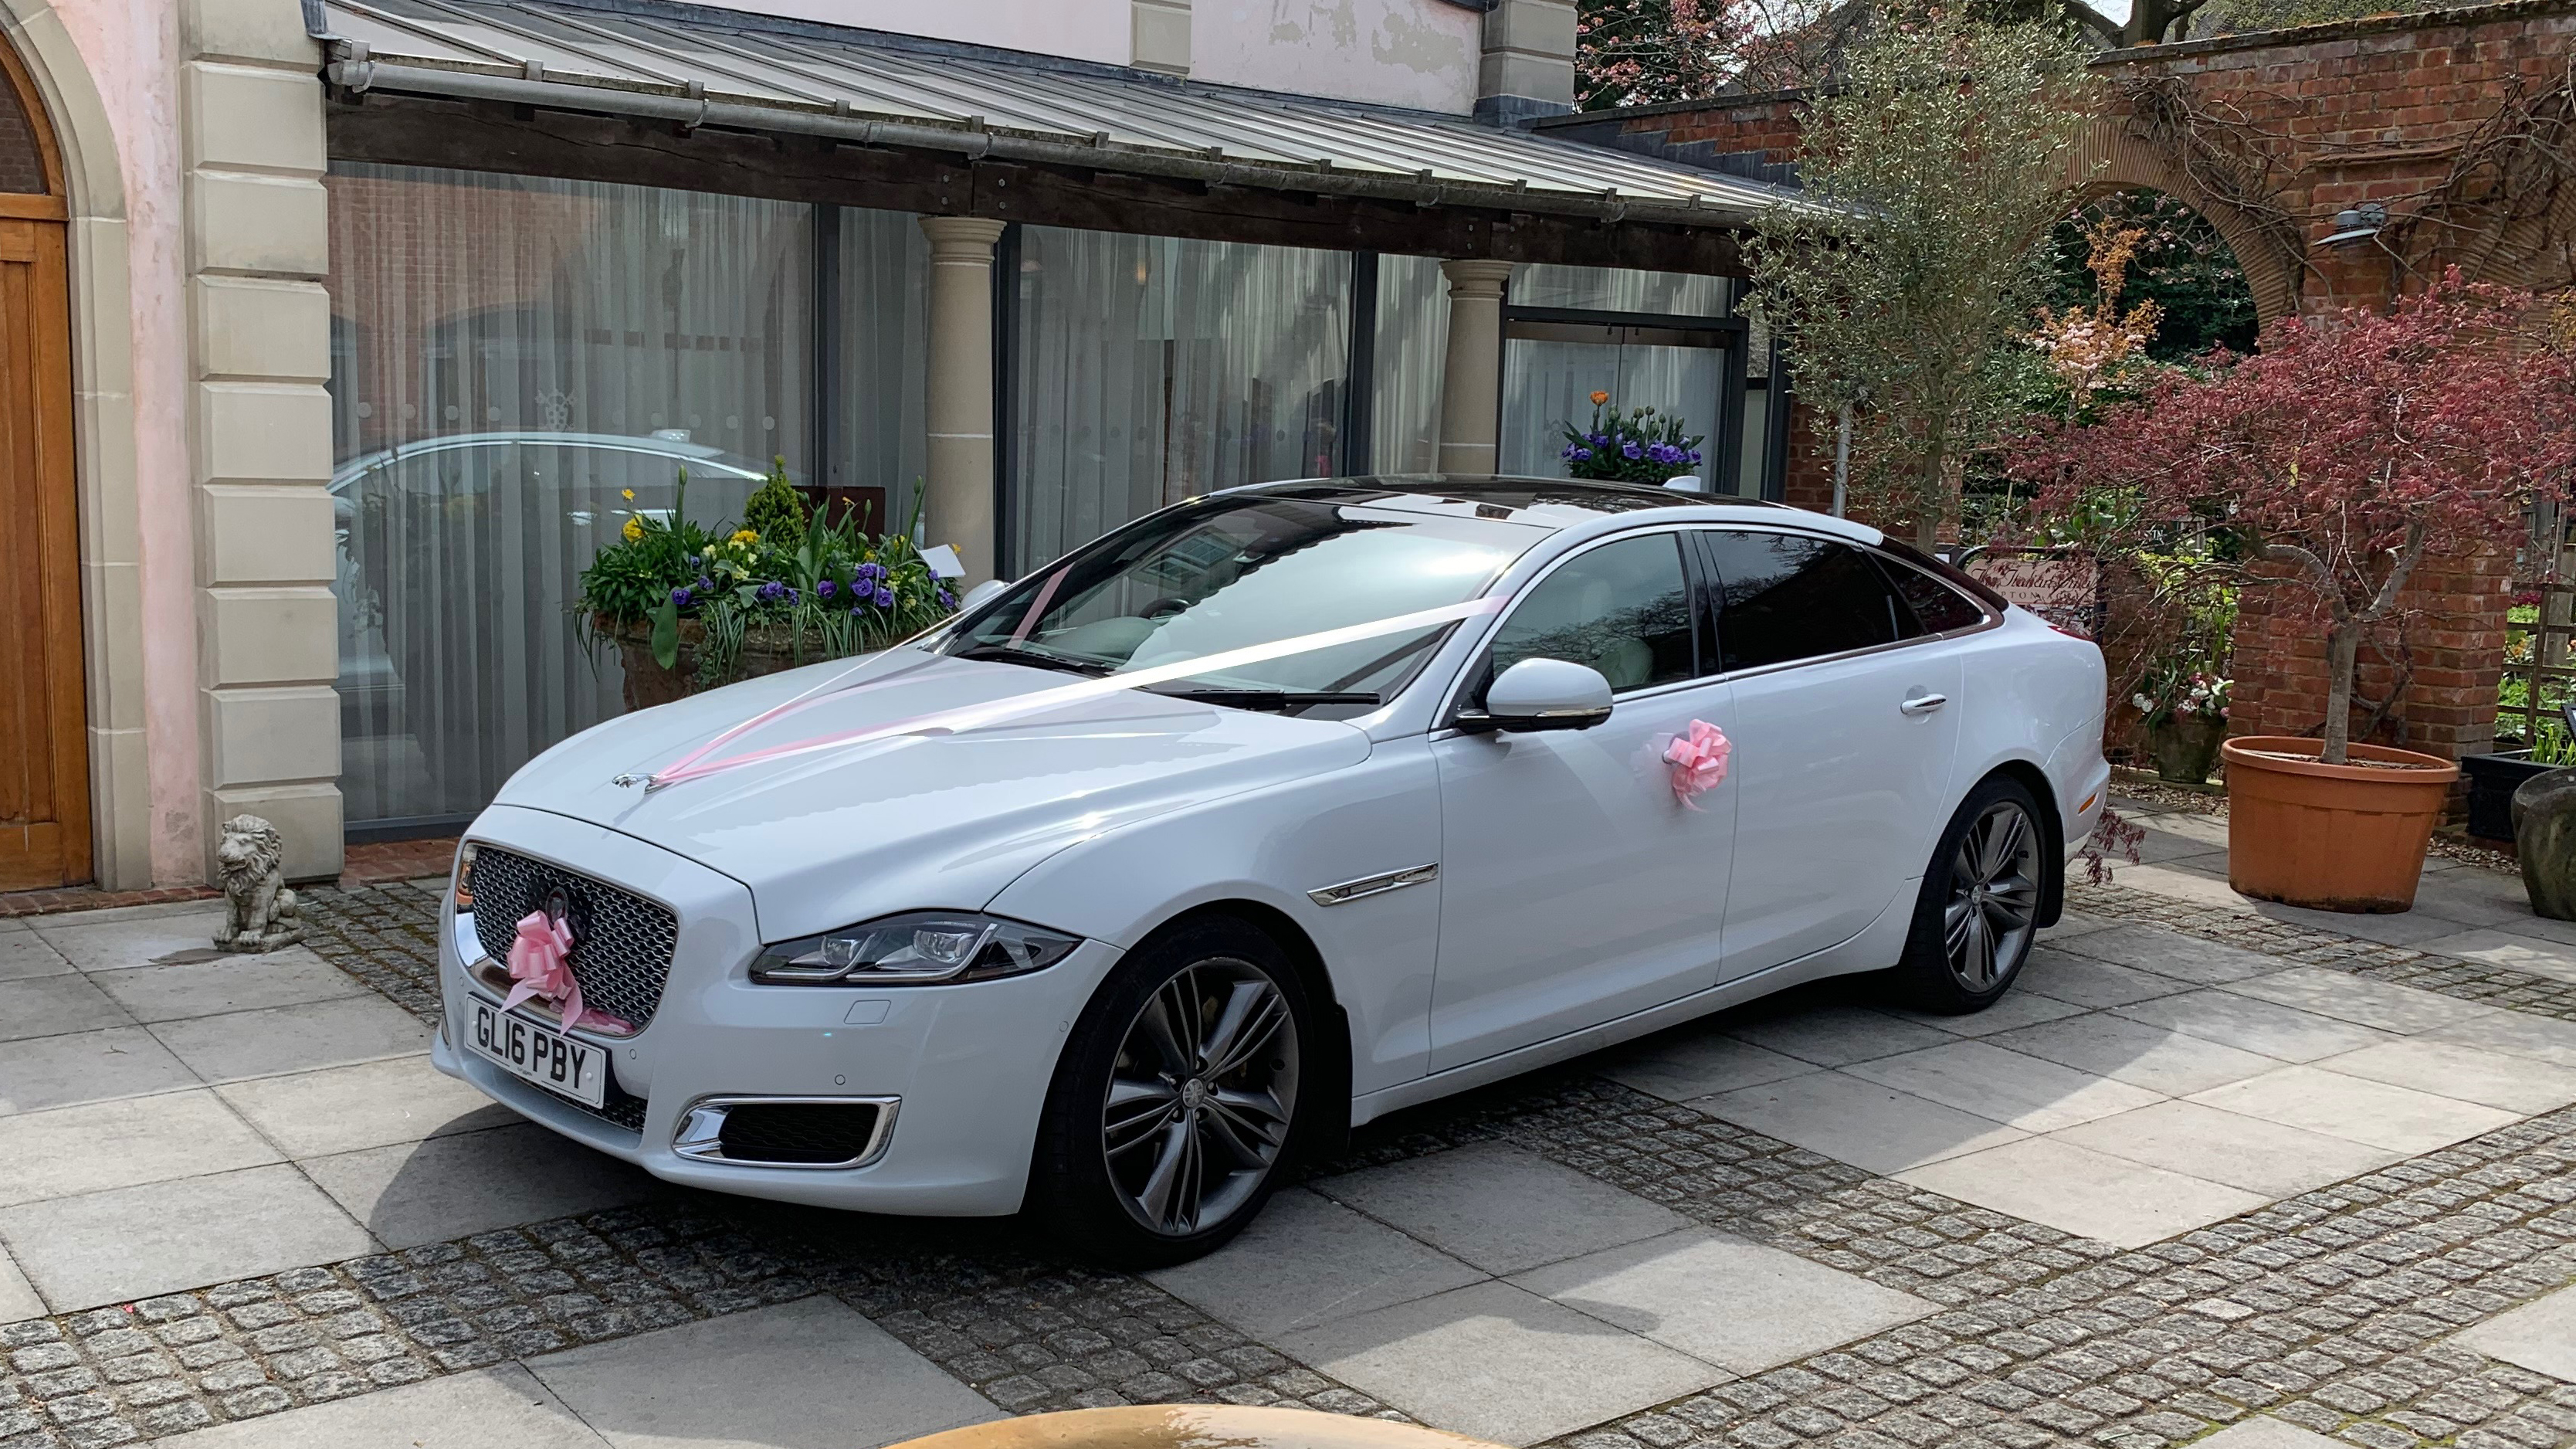 Dorset based White Jaguar XJ decorated with pale pink ribbons and bows.